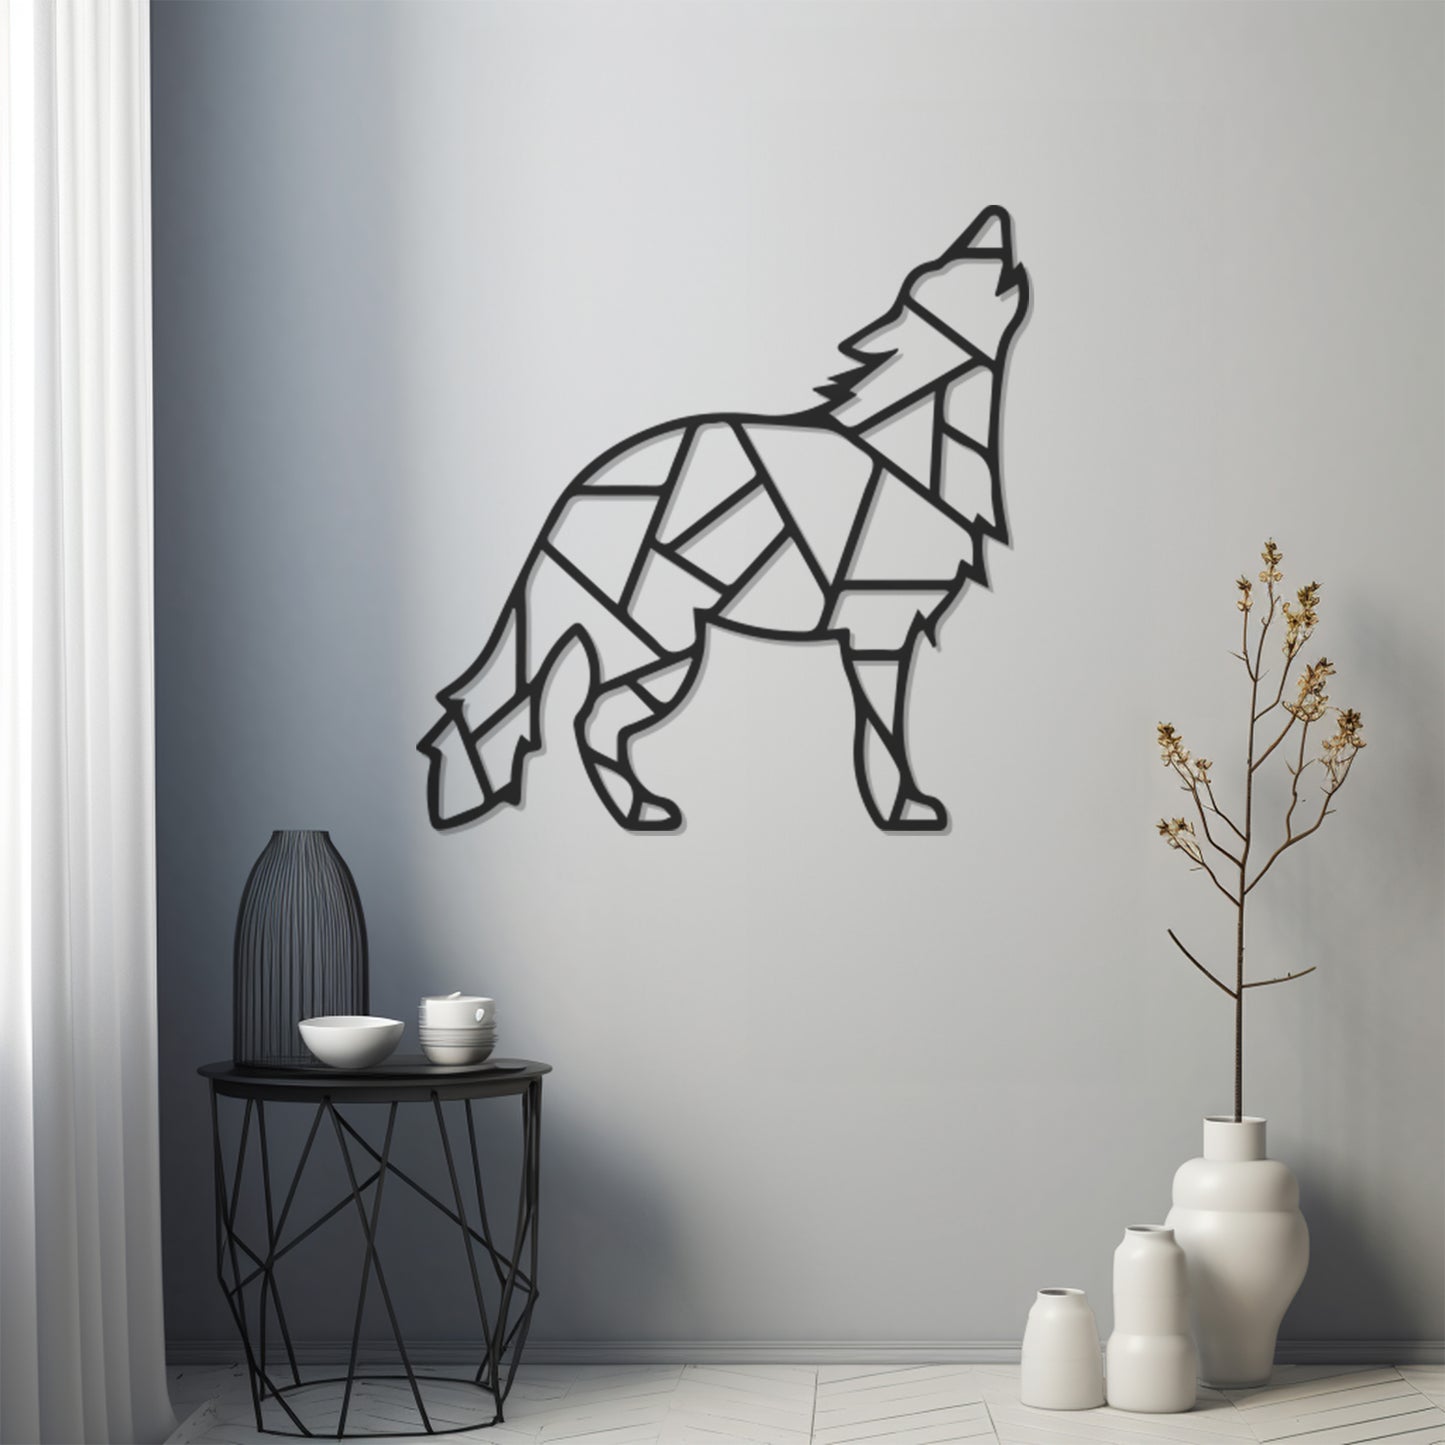 Wolf Metal Wall Decor Made With Geometric Abstract Patterns